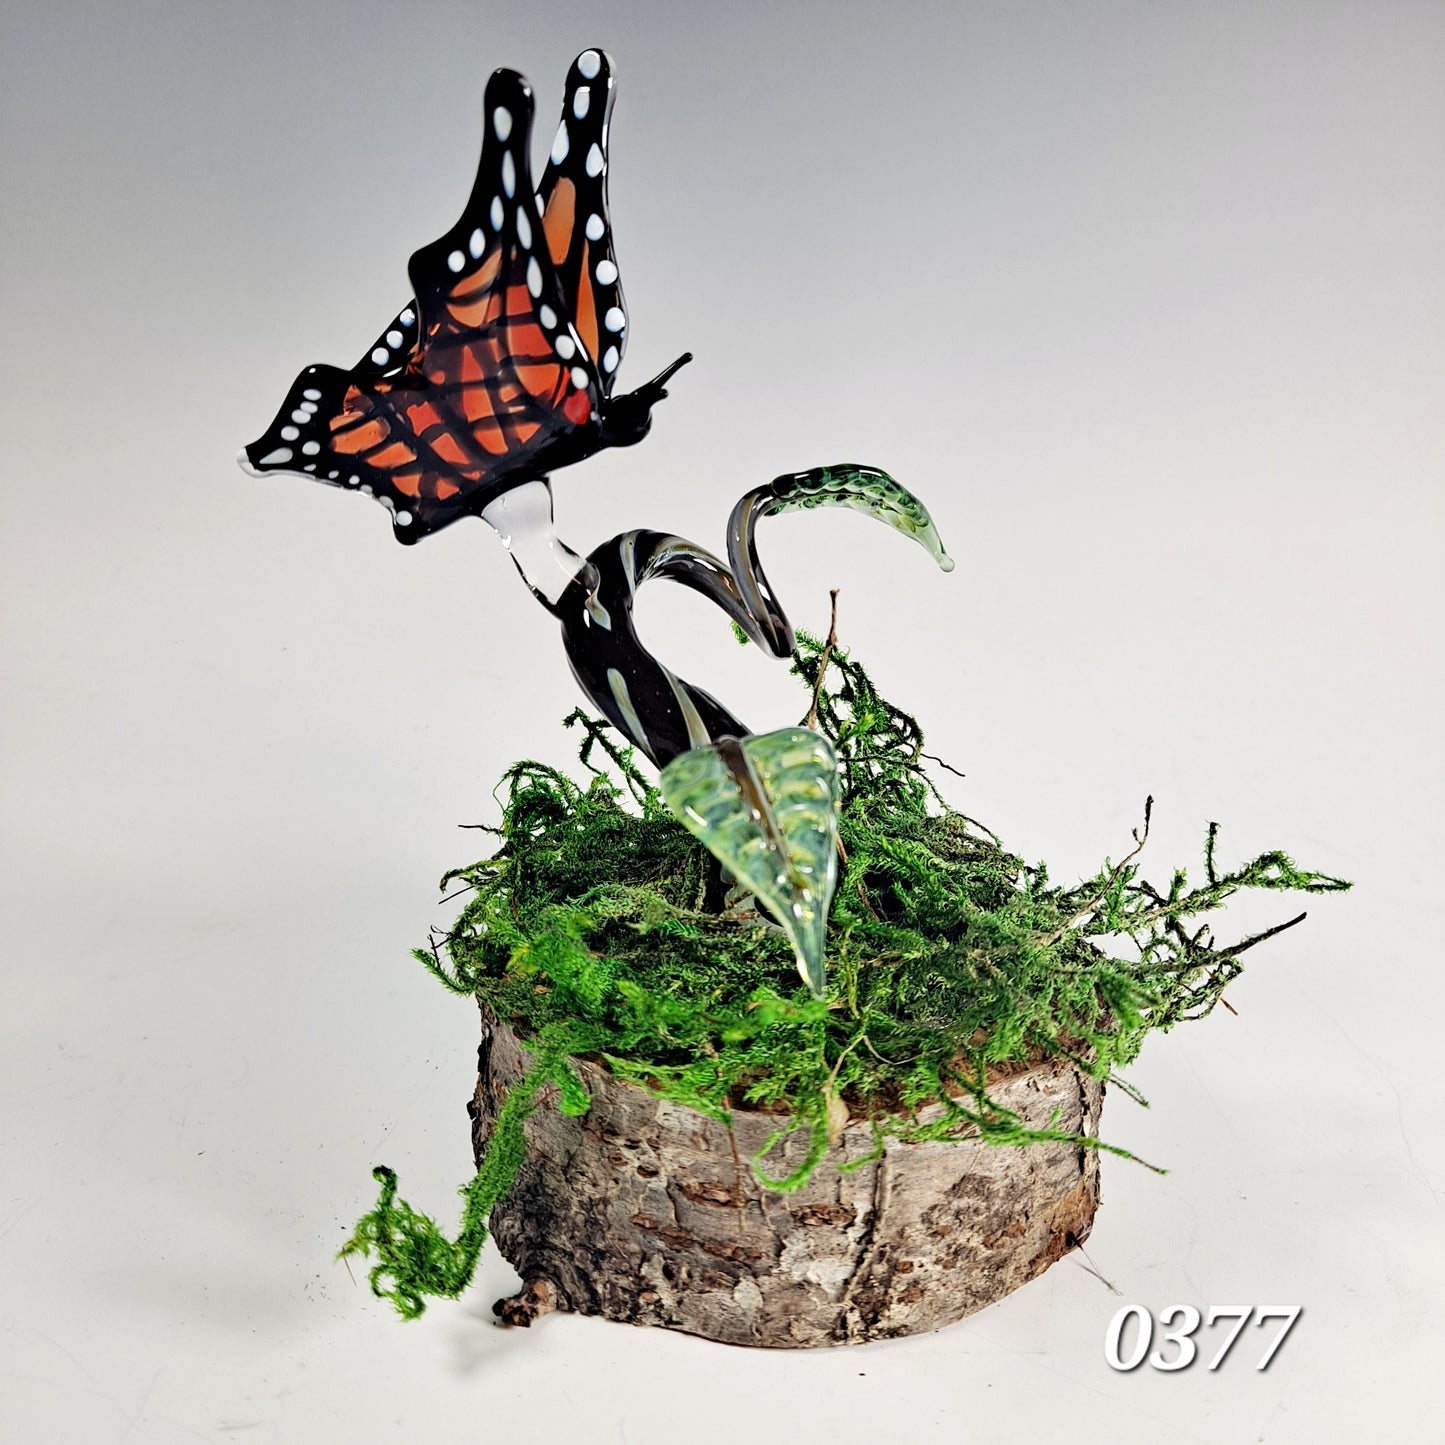 Glass Butterfly Sculpture Collection